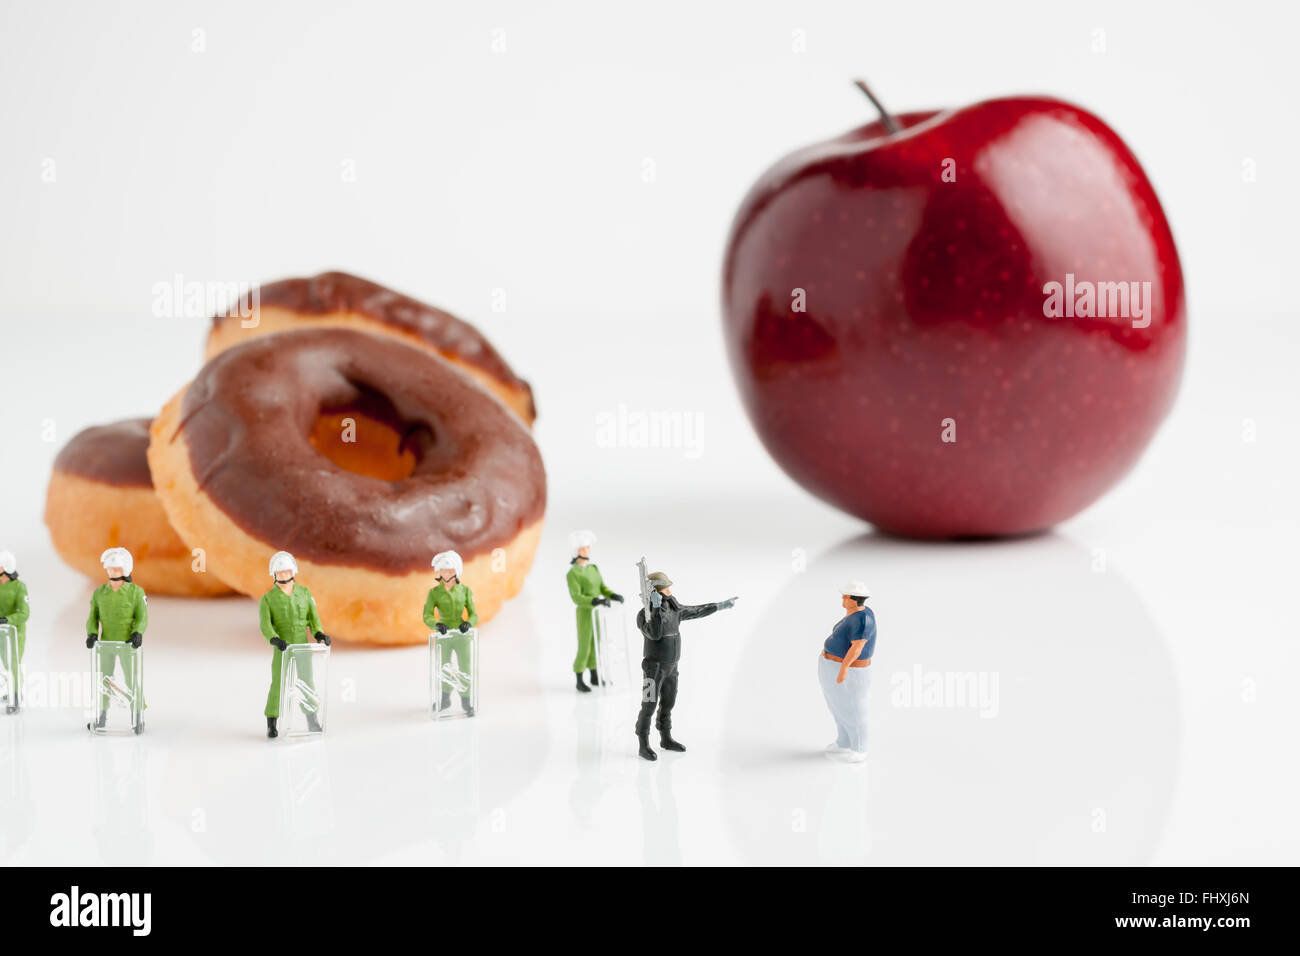 Tiny riot police telling a fat man to eat an apple instead of donuts an obesity or nanny state concept Stock Photo